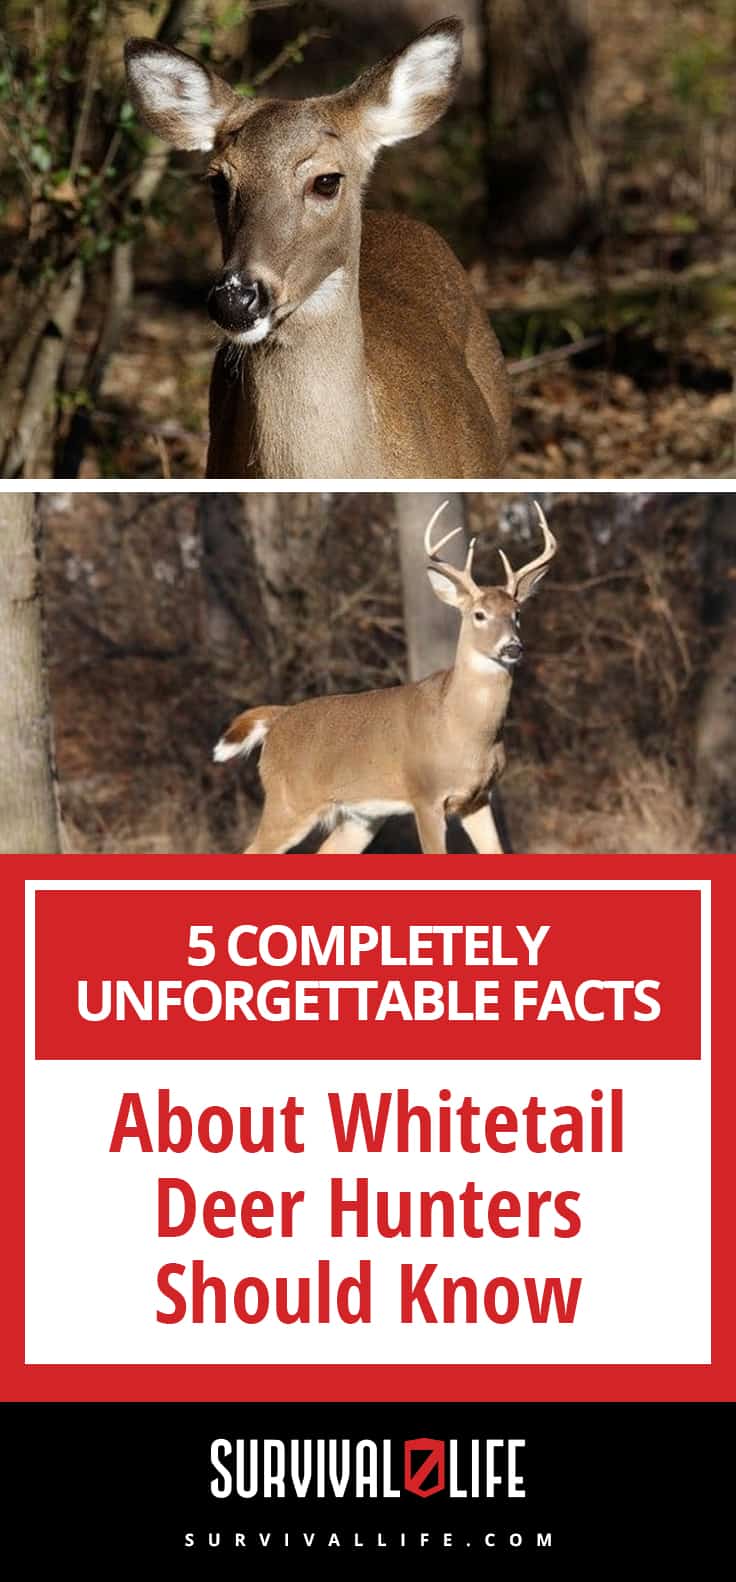 Completely Unforgettable Facts About Whitetail Deer Hunters Should Know | https://survivallife.com/facts-about-whitetail-deer/